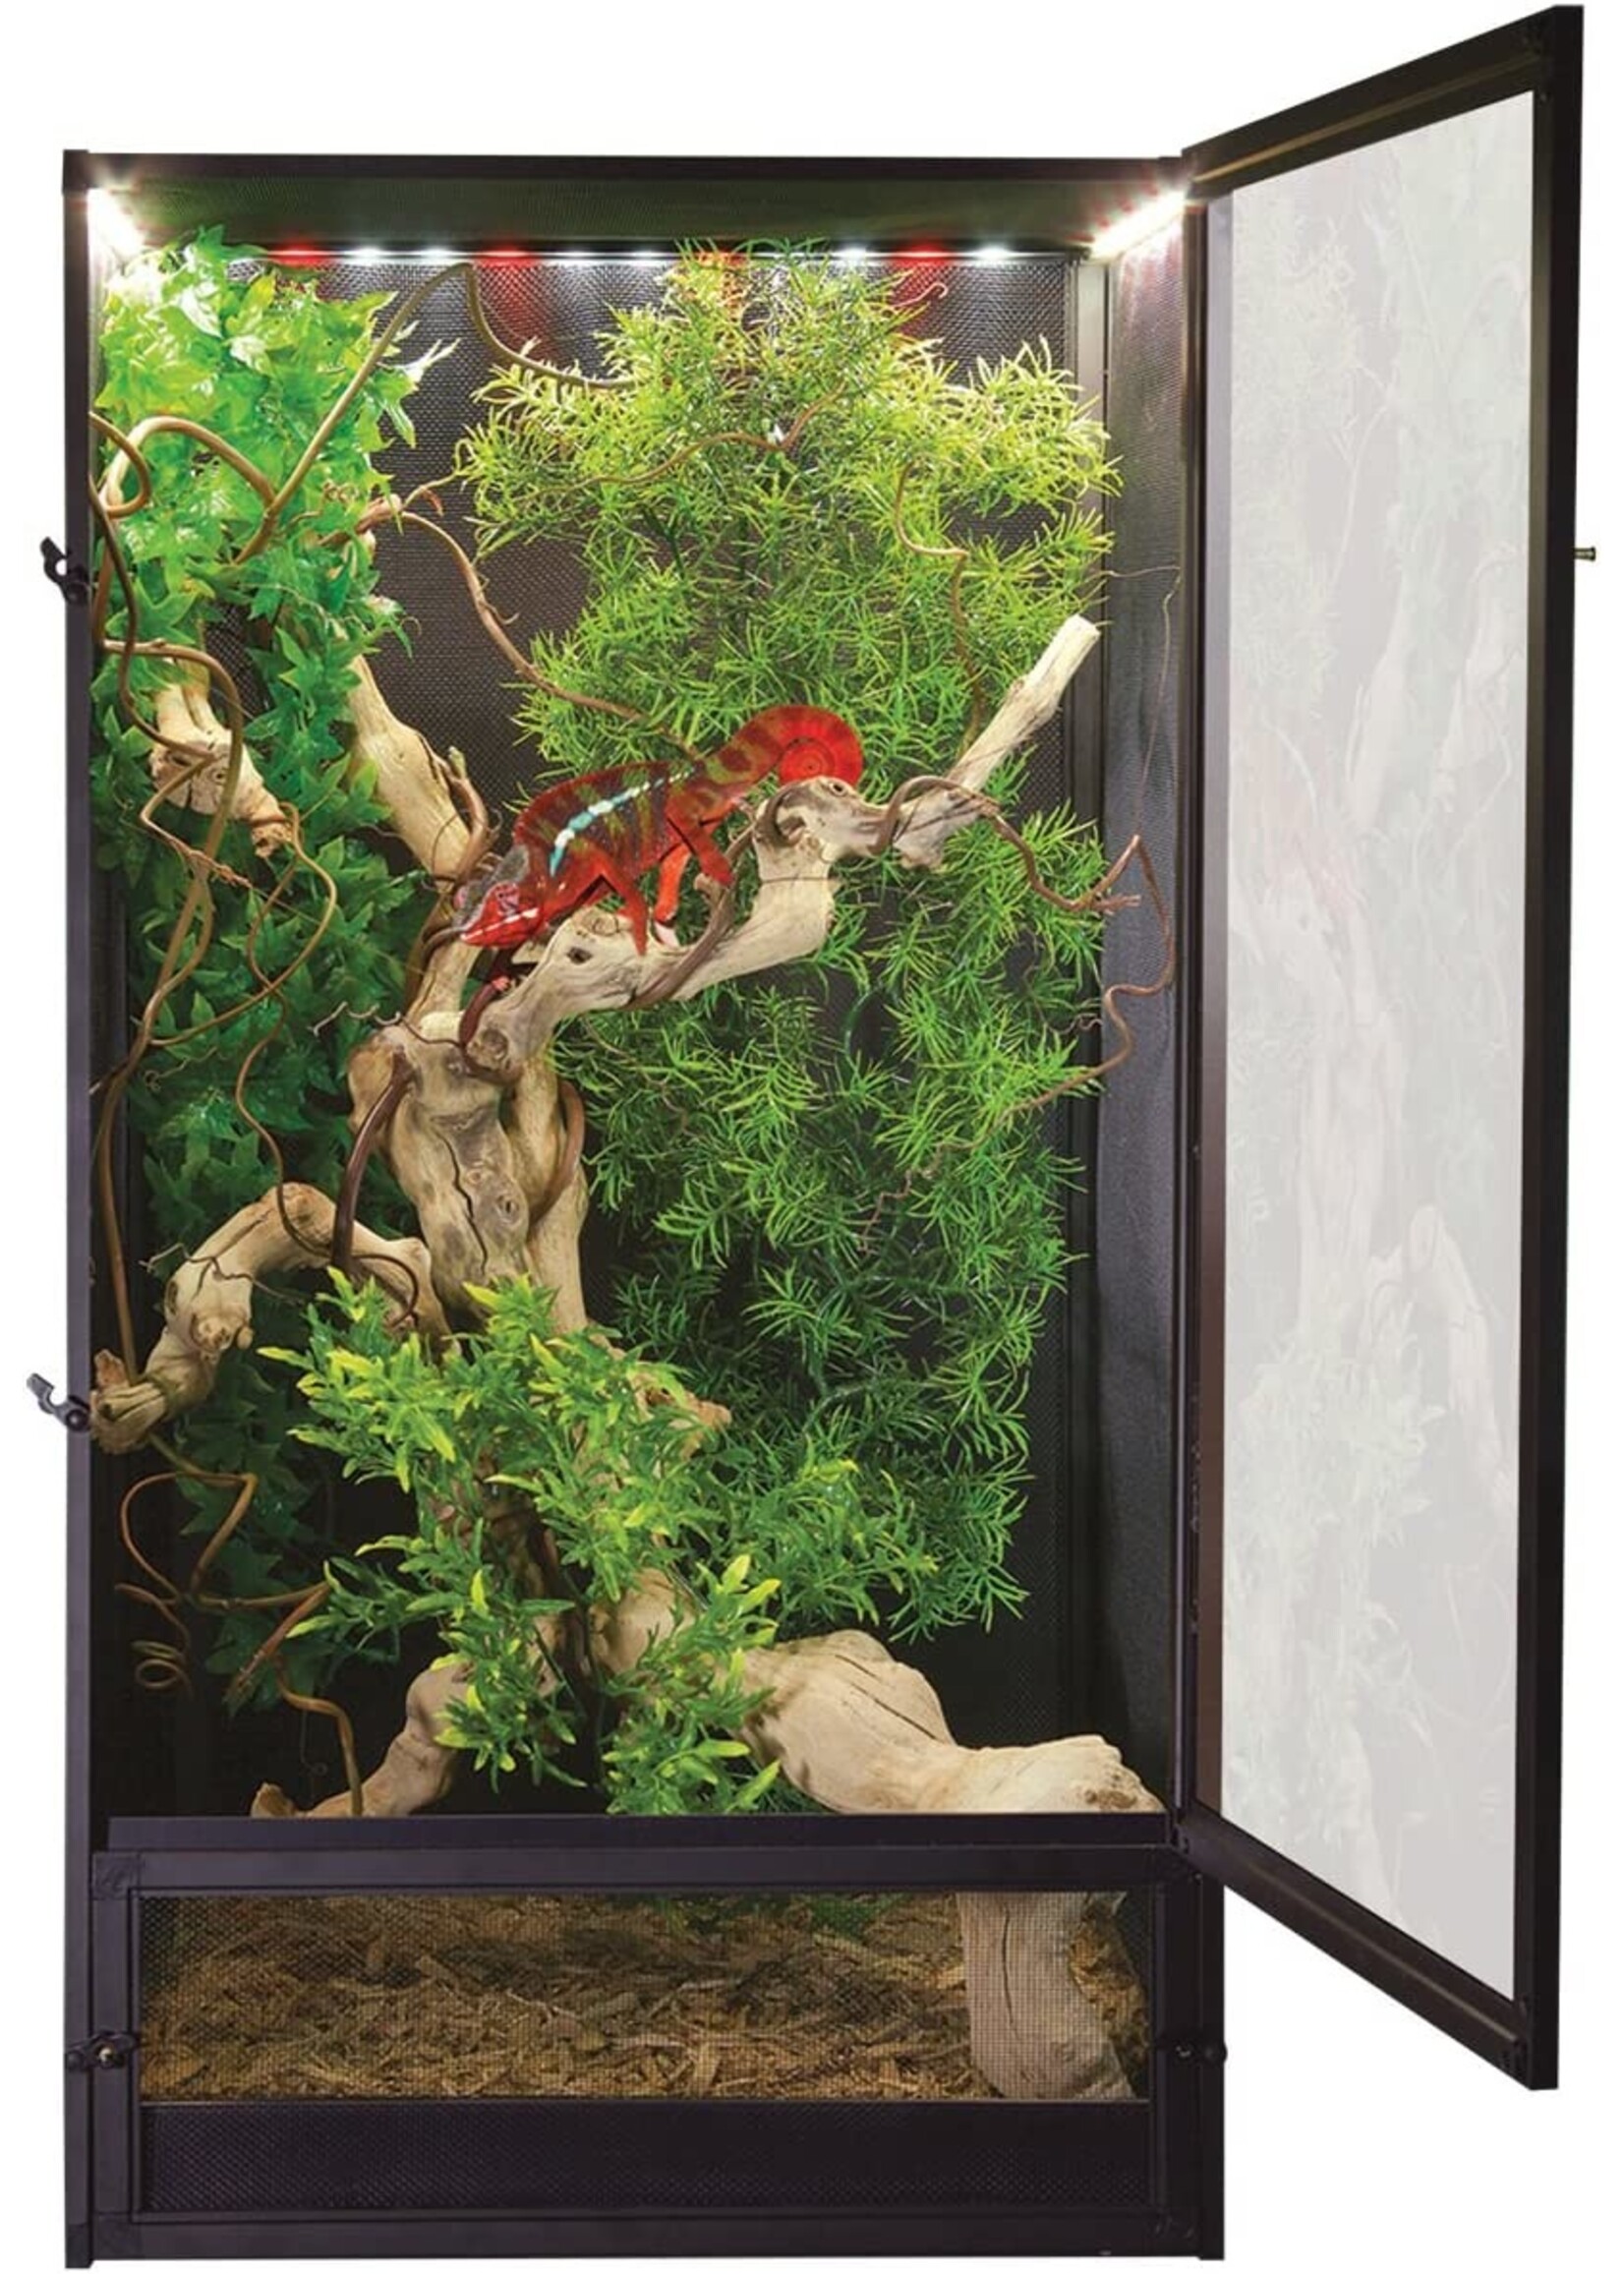 Zoo Med Zoo Med ReptiBreeze LED Deluxe Screen Cage Medium 16 x 16 x 30" w/ Built in LED Lights